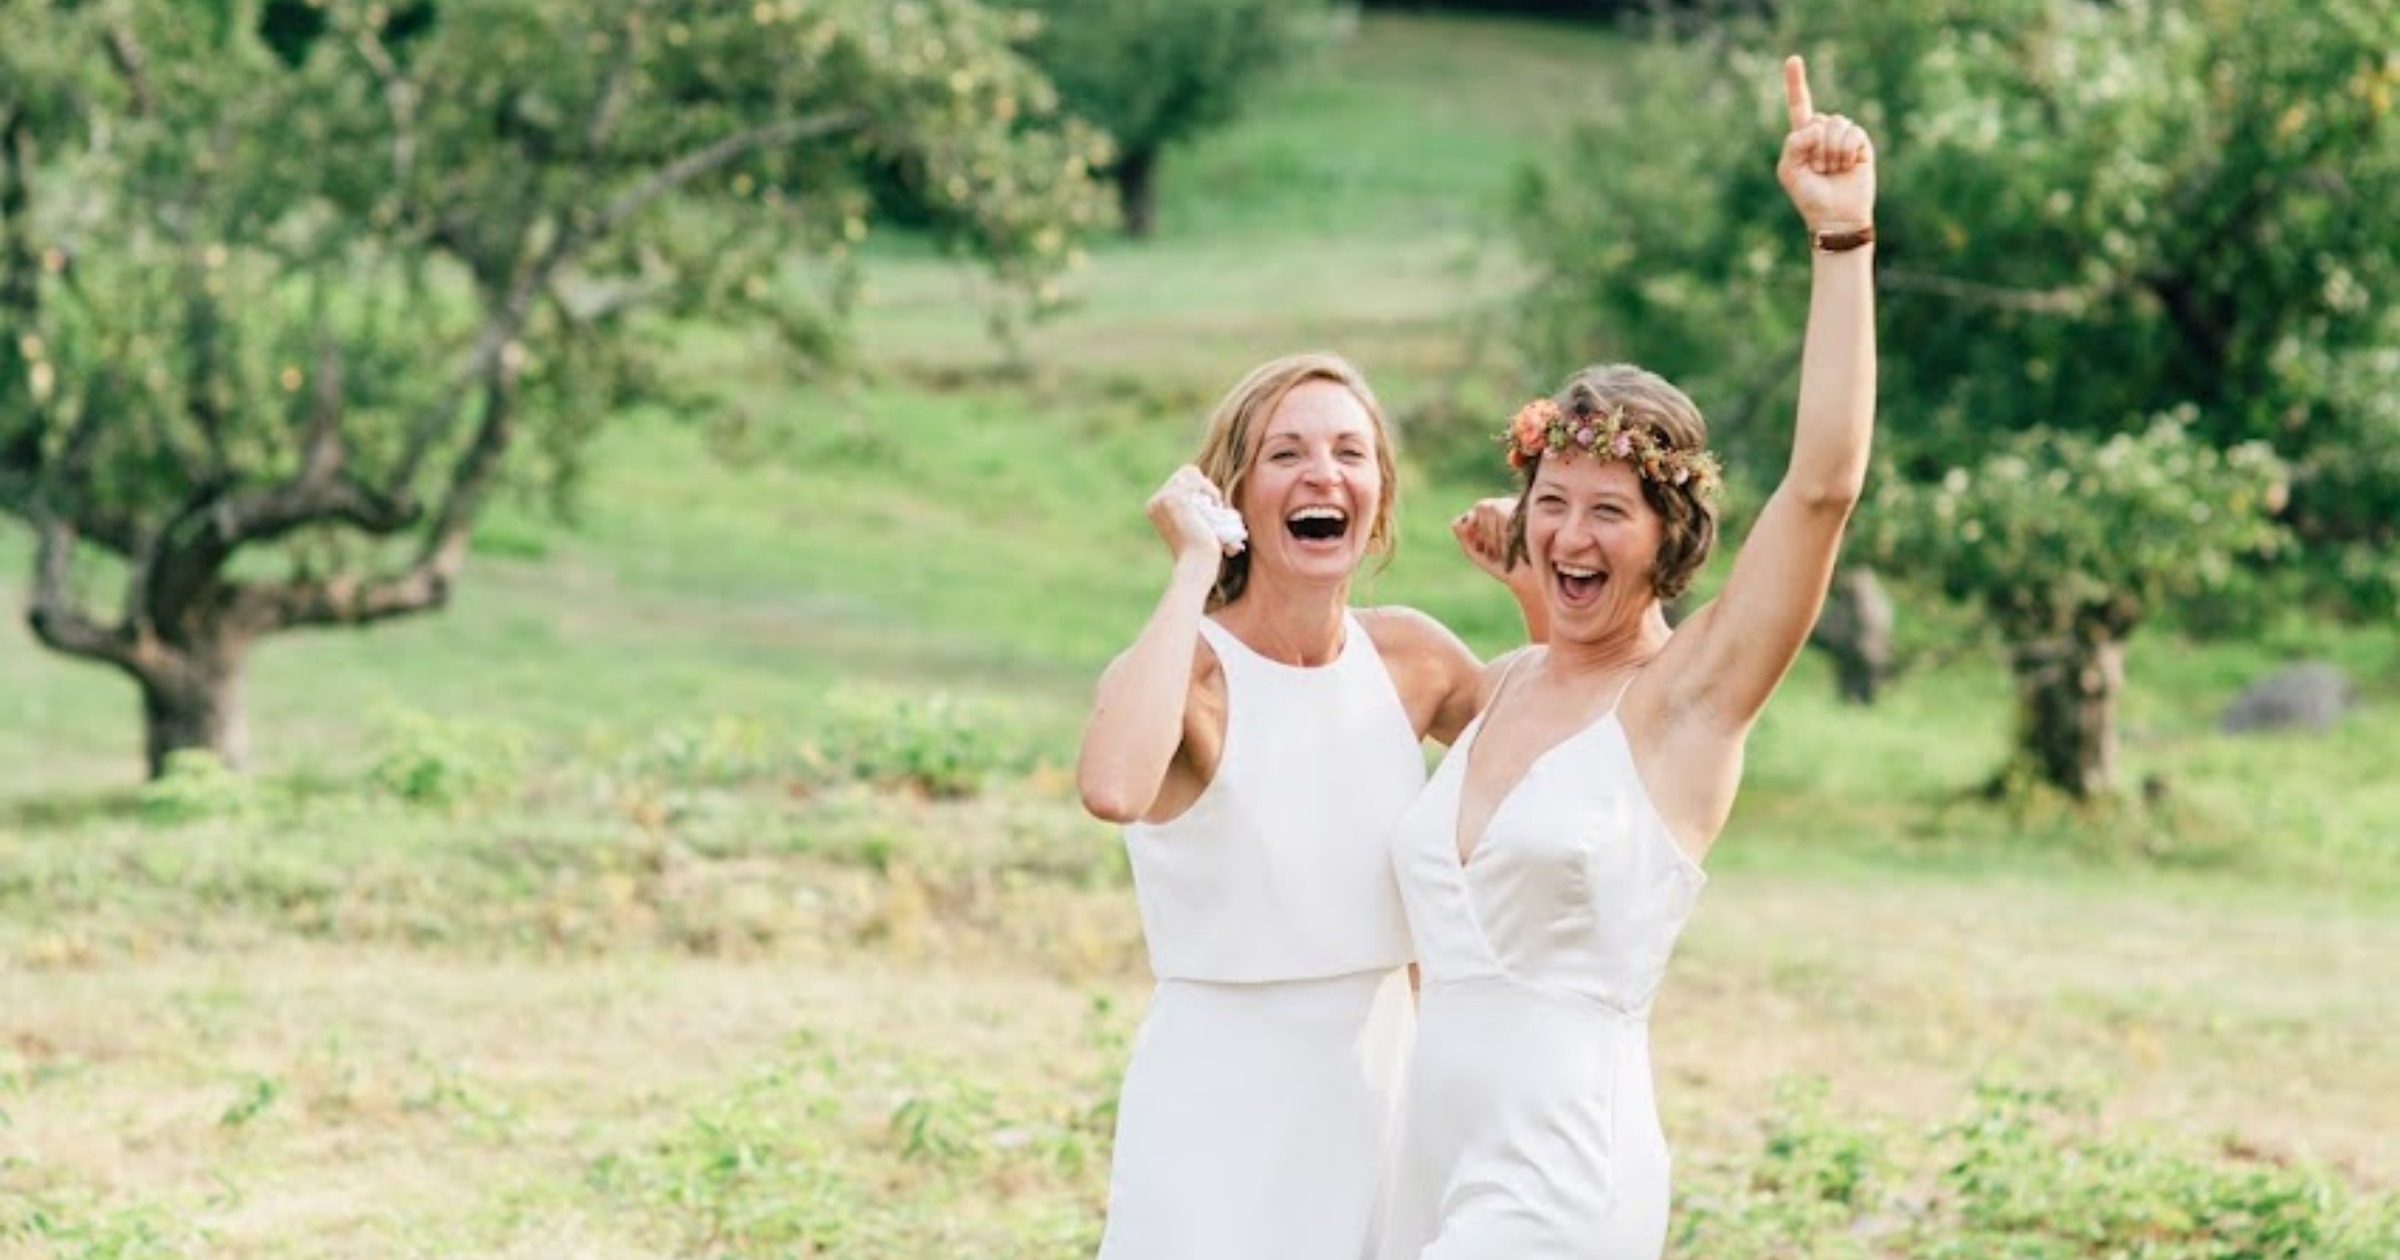 A New England Barn in Summer was the Perfect Setting for these Brides